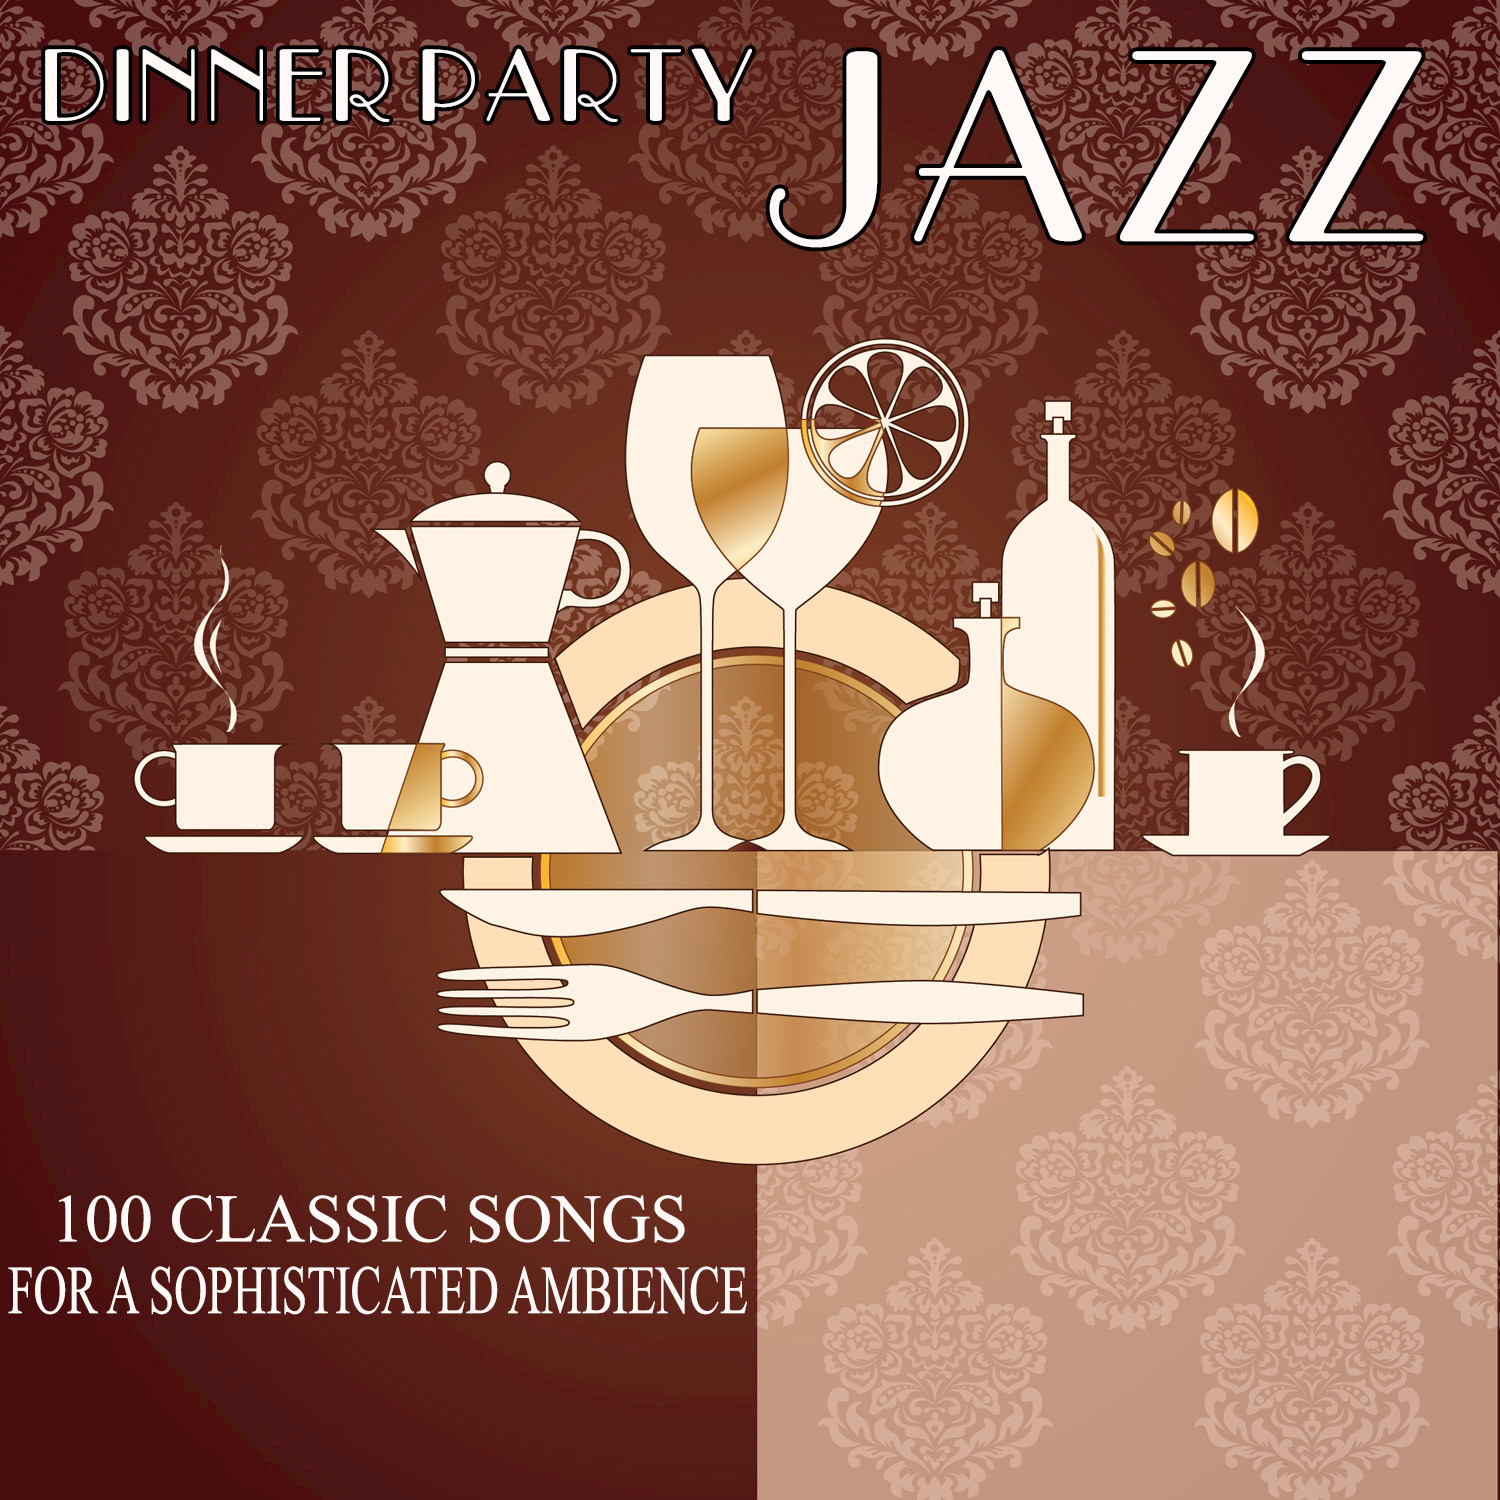 Dinner Party Jazz - 100 Classic Songs for a Sophisticated Ambience